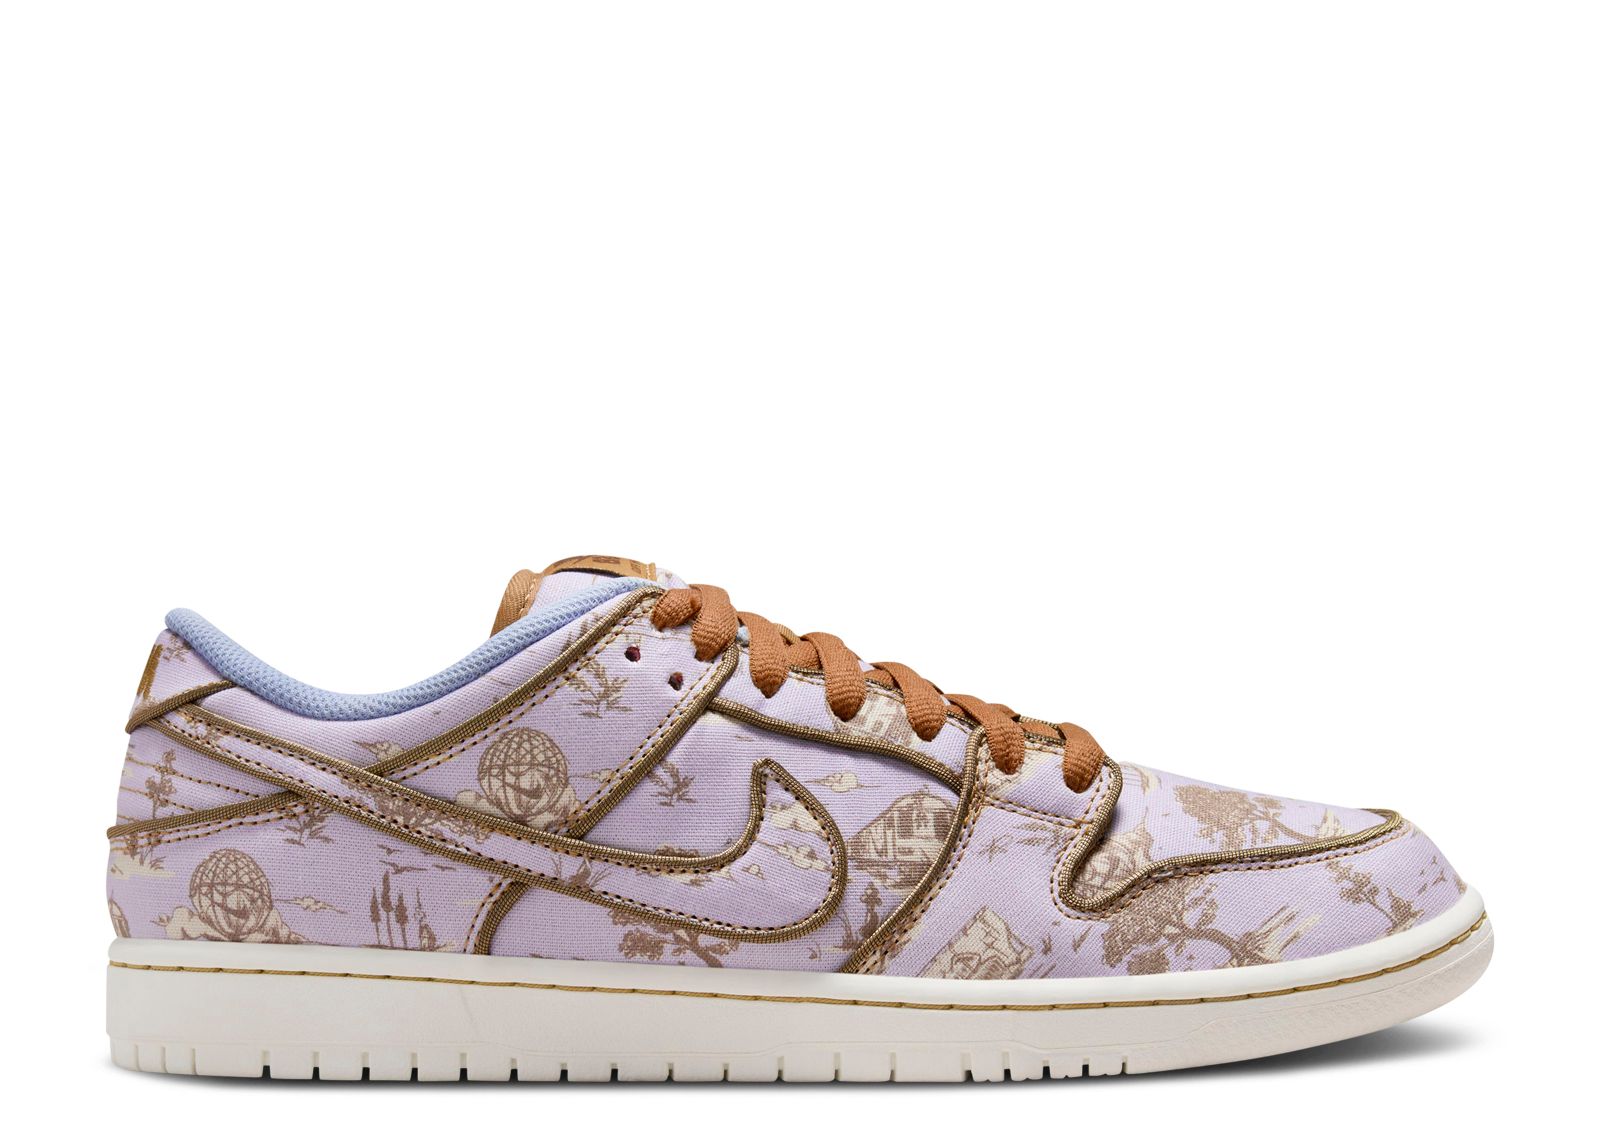 DUNK LOW PREMIUM SB 'CITY OF STYLE PACK'